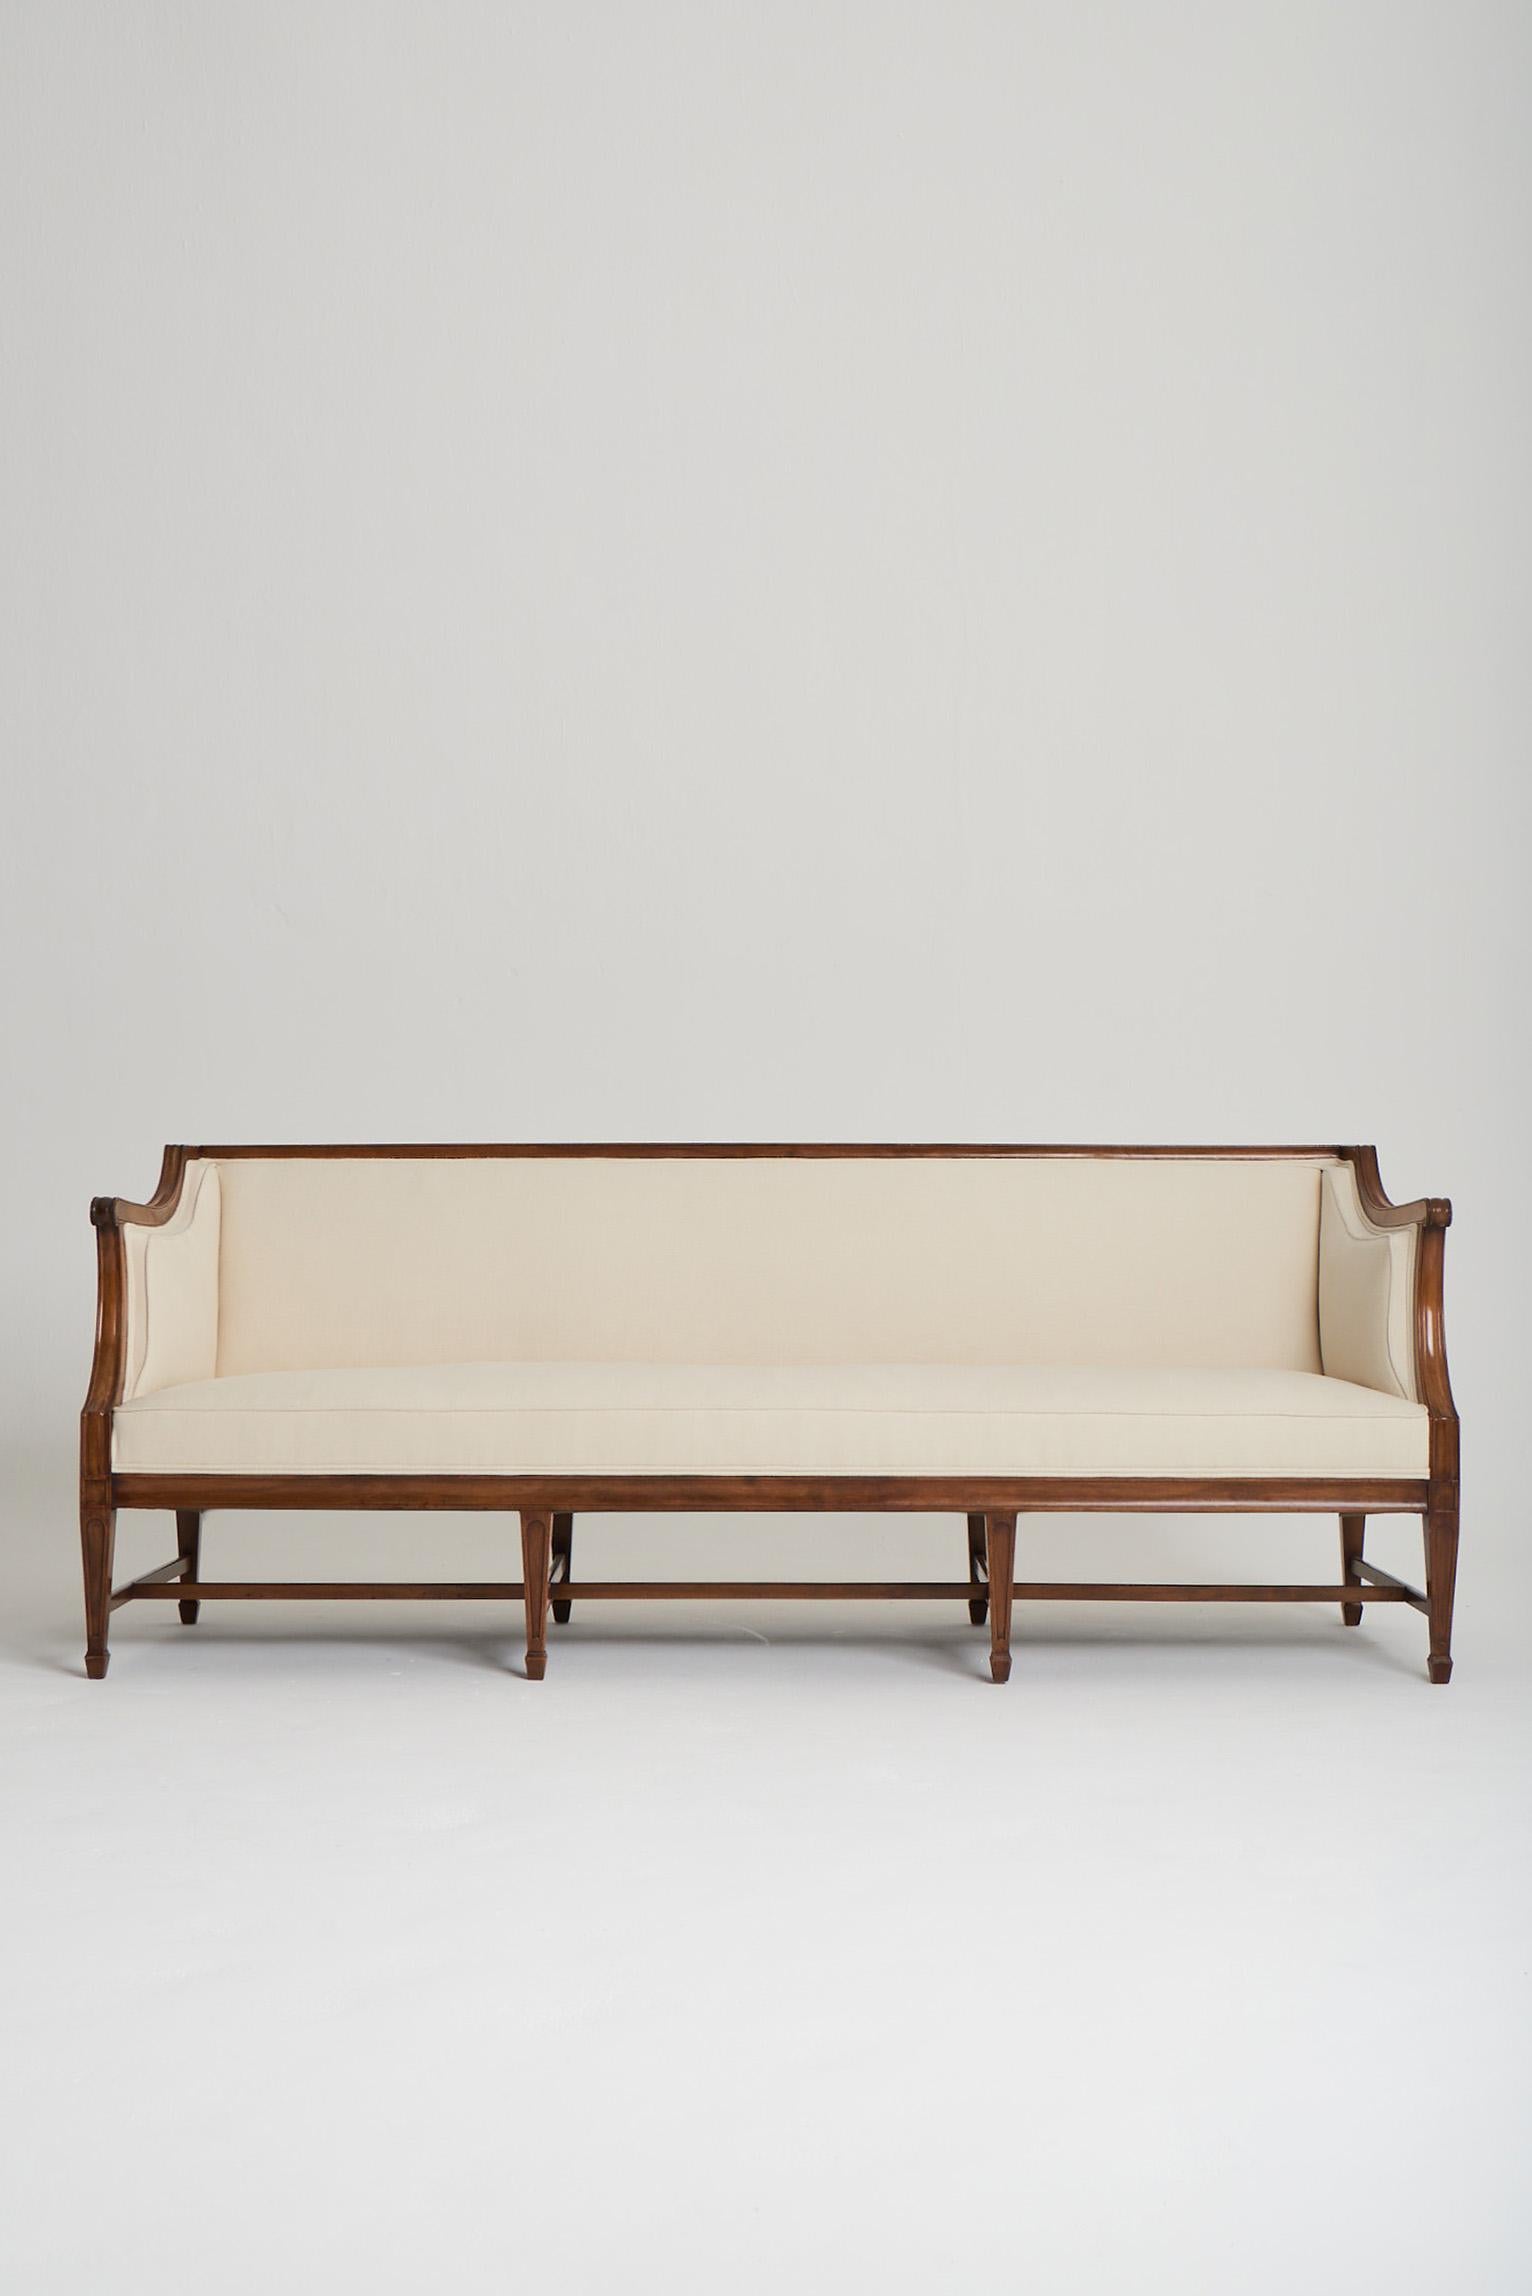 A solid mahogany sofa by Frits Henningsen (Danish, 1889–1965).
Fully reupholstered in ivory linen. 
Denmark, Circa 1940.